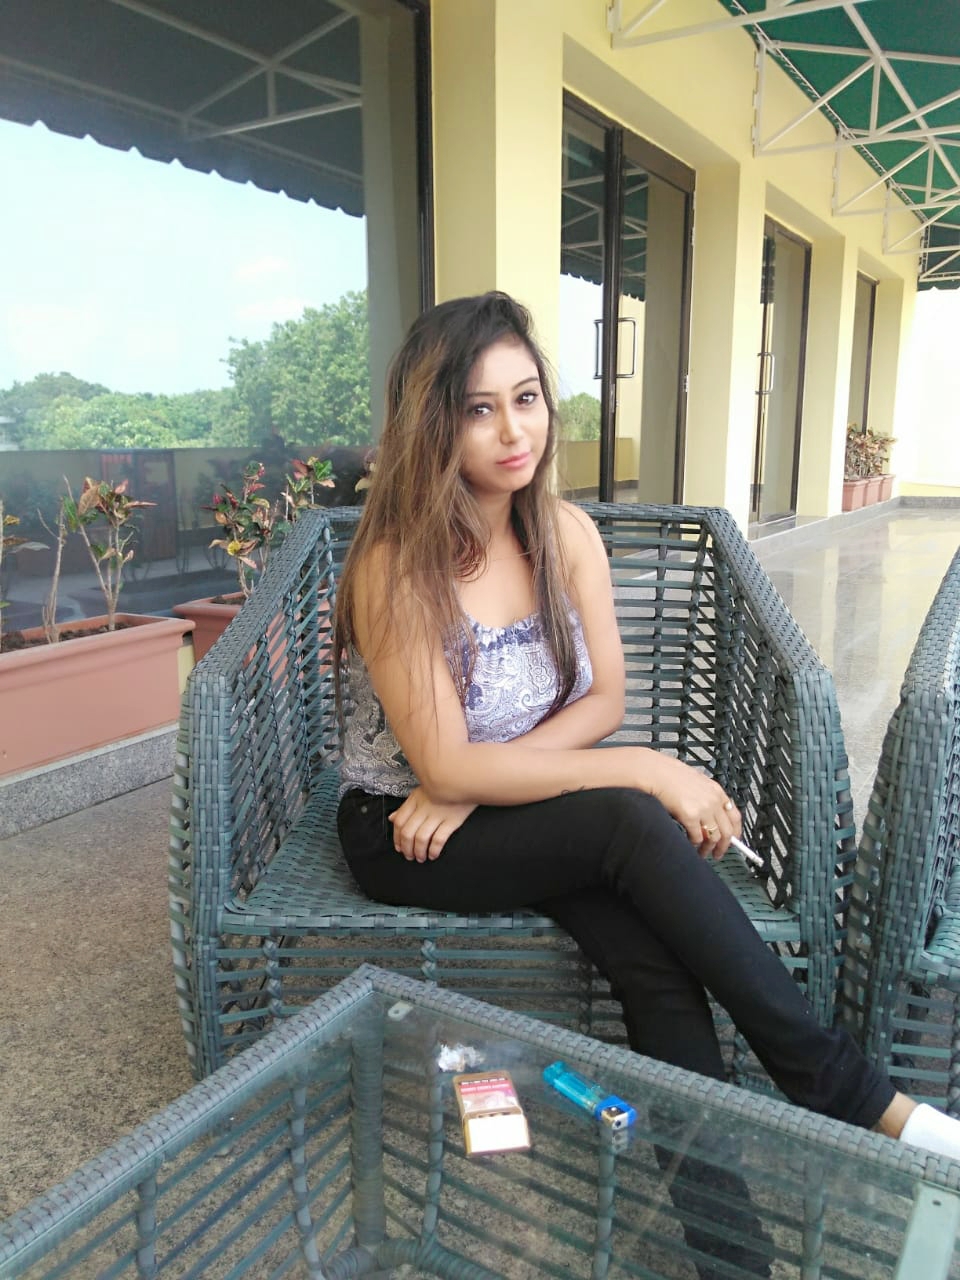 Call Girls In Anand Vihar >9717957793 Top Quality Model Escort Services In Delhi-NCR